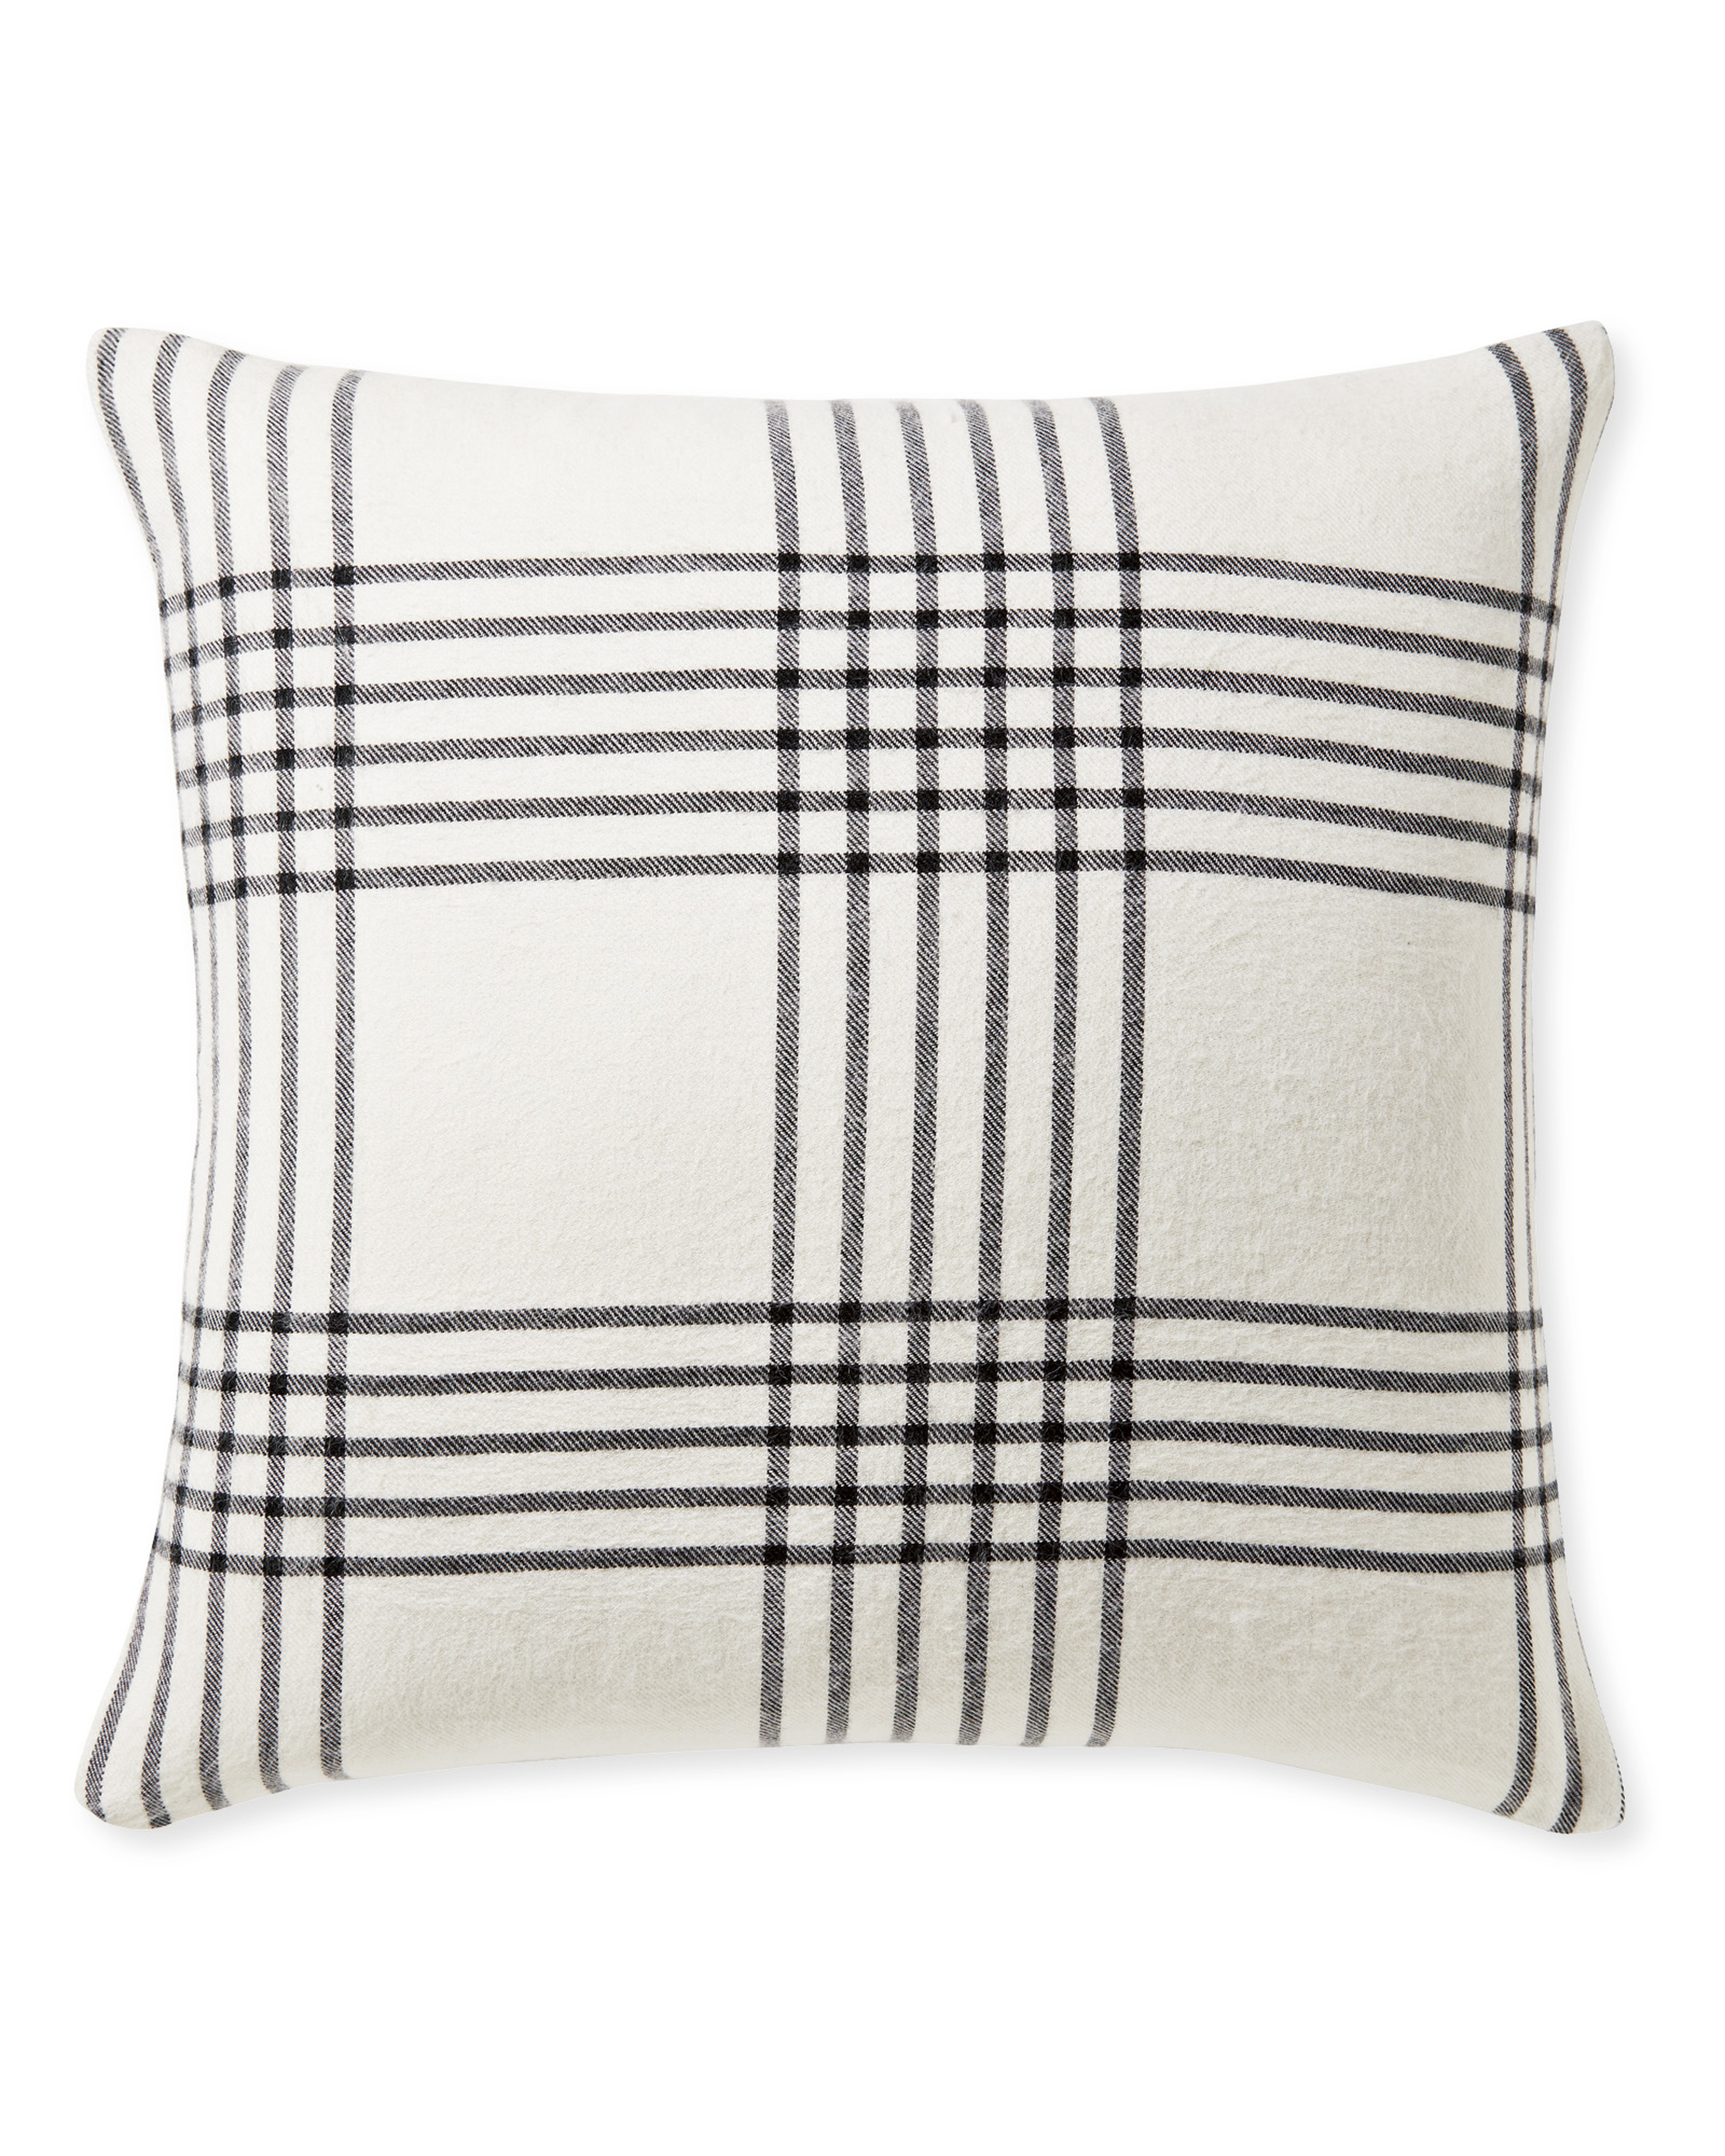 Blakely Plaid Pillow Cover - Serena and Lily